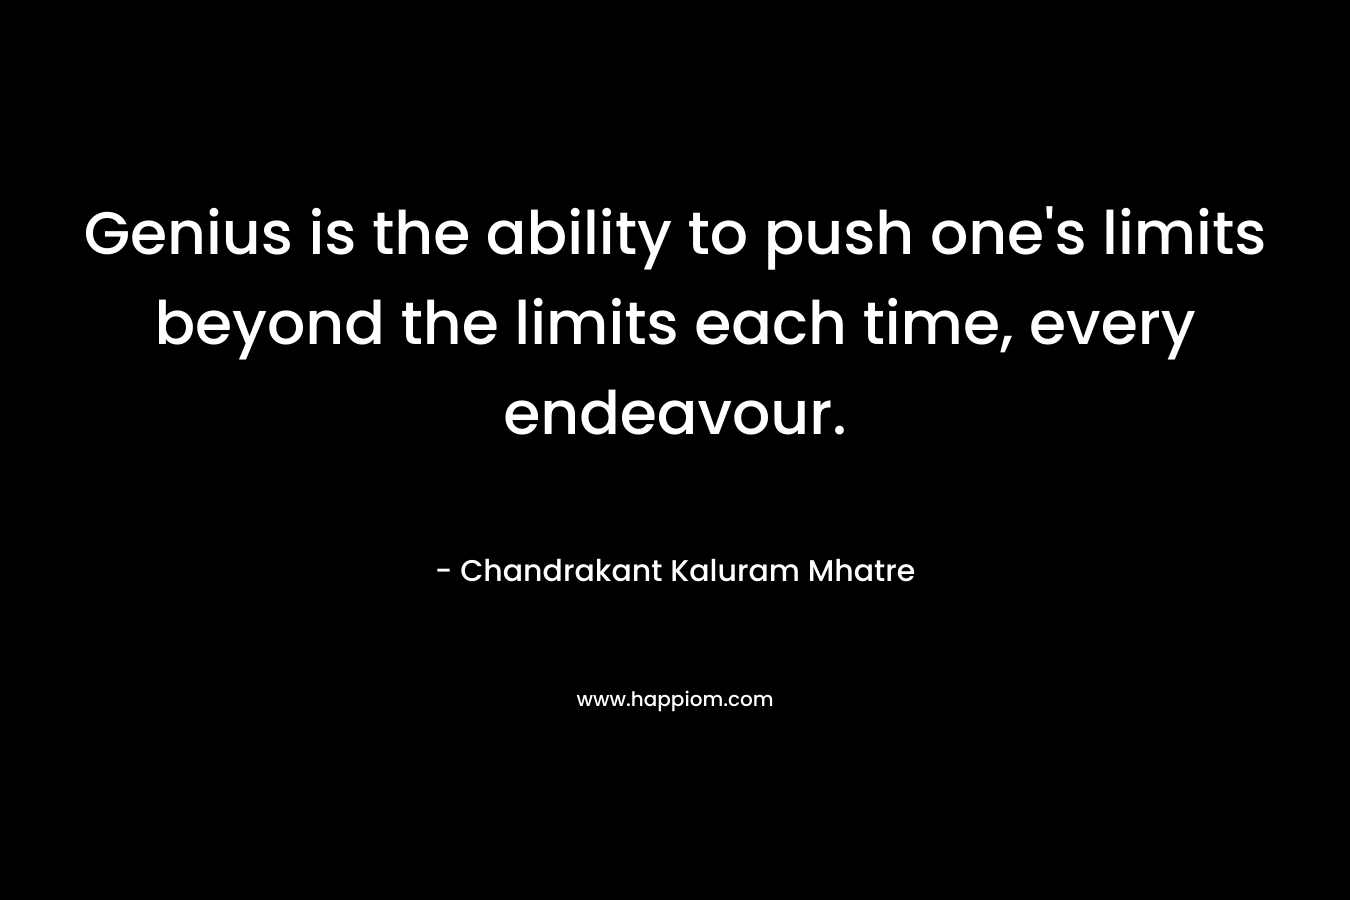 Genius is the ability to push one’s limits beyond the limits each time, every endeavour. – Chandrakant Kaluram Mhatre